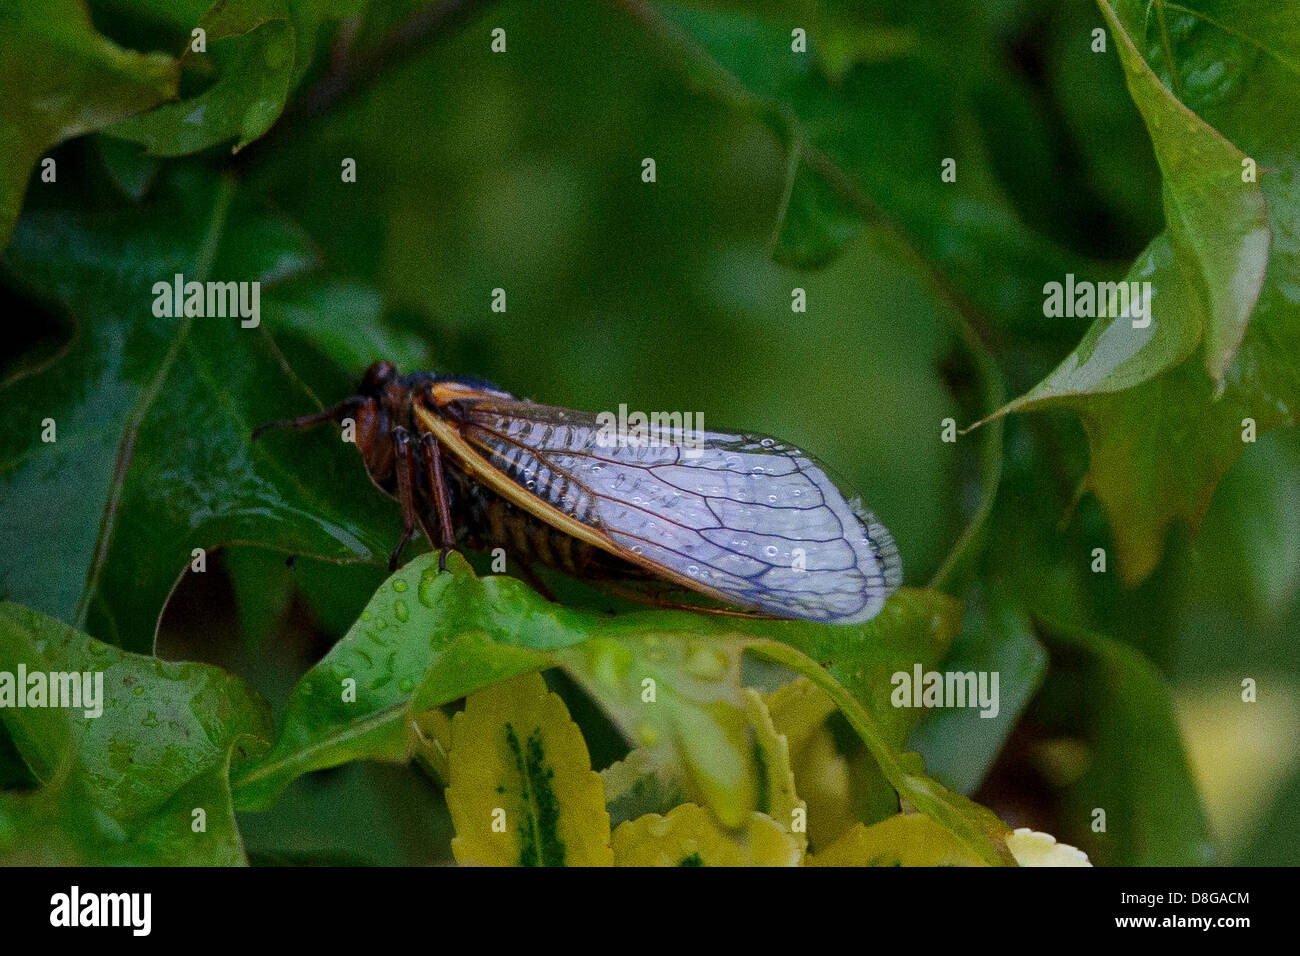 Edison, New Jersey, U.S. May 28, 2013. Central New Jersey is invaded by a once in 17-year event of periodical Cicadas. The Cicadas are infesting local trees, bushes, and items that consist of wood such as mailboxes. Credit: Cal Sport Media /Alamy Live News Stock Photo